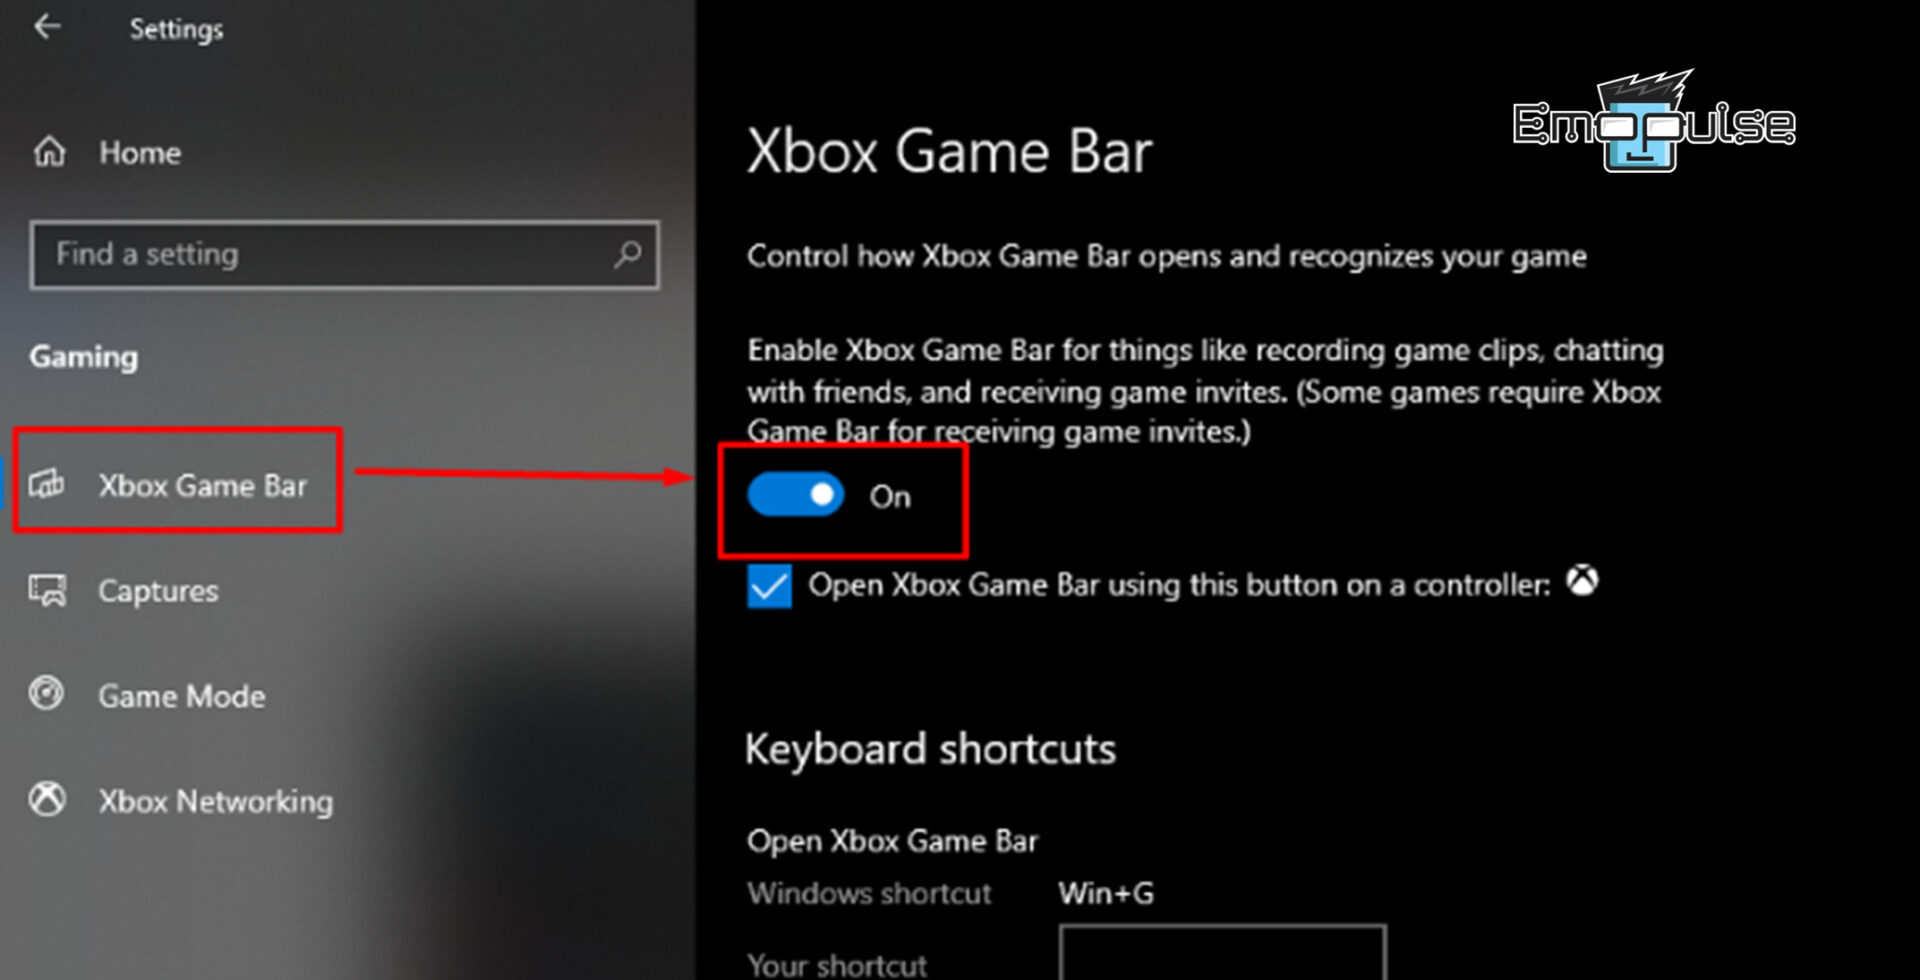 Gaming Features Aren’t Available resolved by enabling Xbox Game Bar